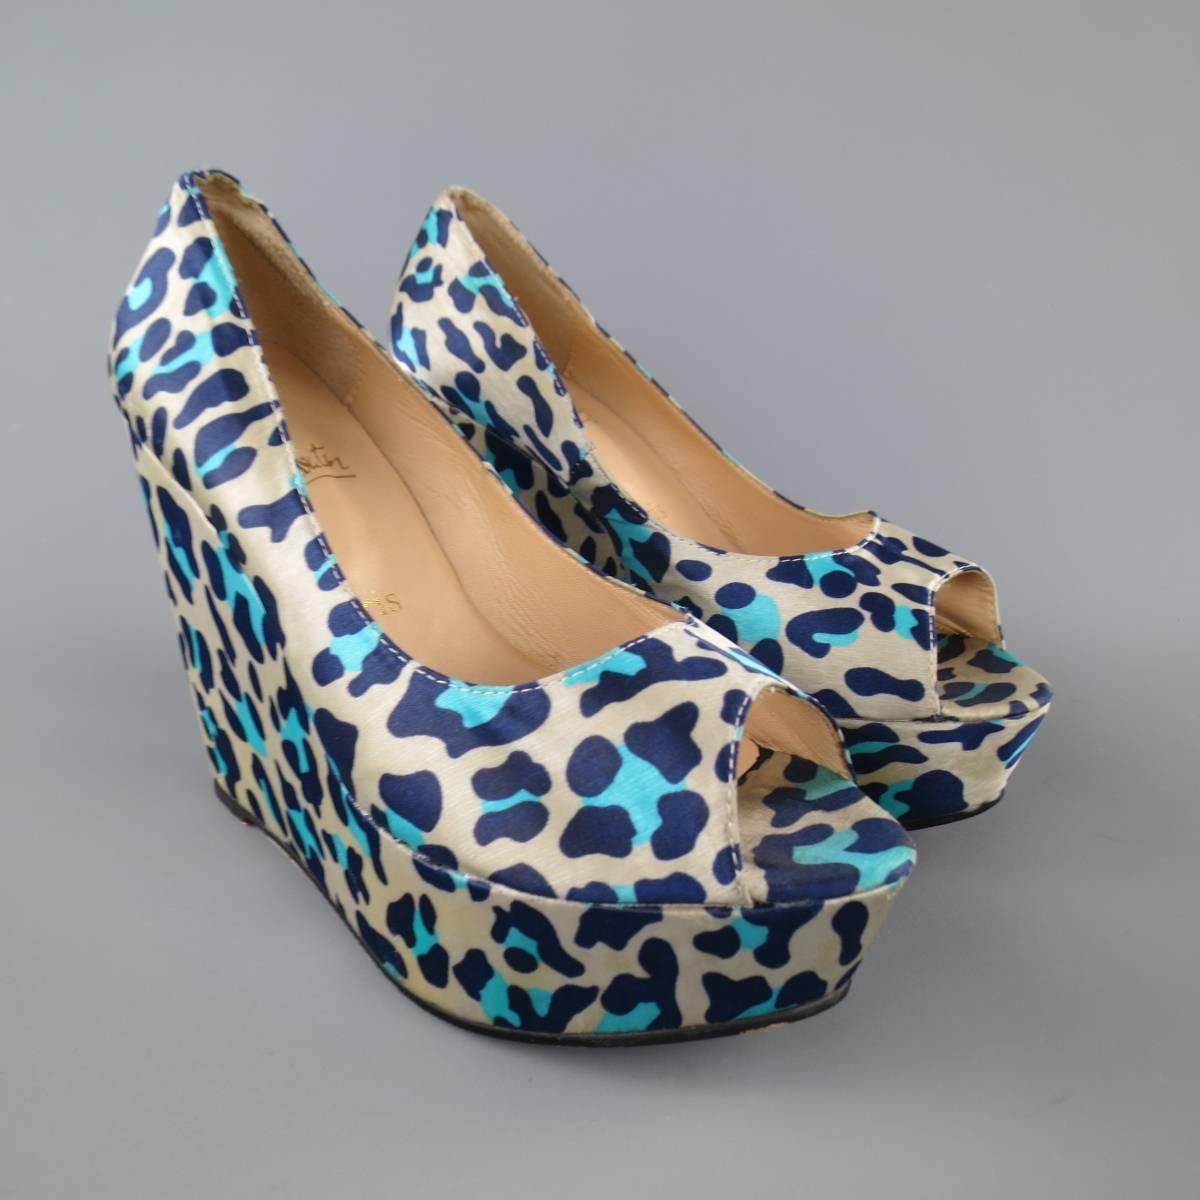 CHRISTIAN LOUBOUTIN pumps come in a beige and blue cheetah print silk satin and feature a peep toe and platform covered wedge. Made in Italy.
 
Good Pre-Owned Condition.
Marked: IT 39
 
Heel:4.25 in.
Platform:  1.5 in.


Web ID: 81401 